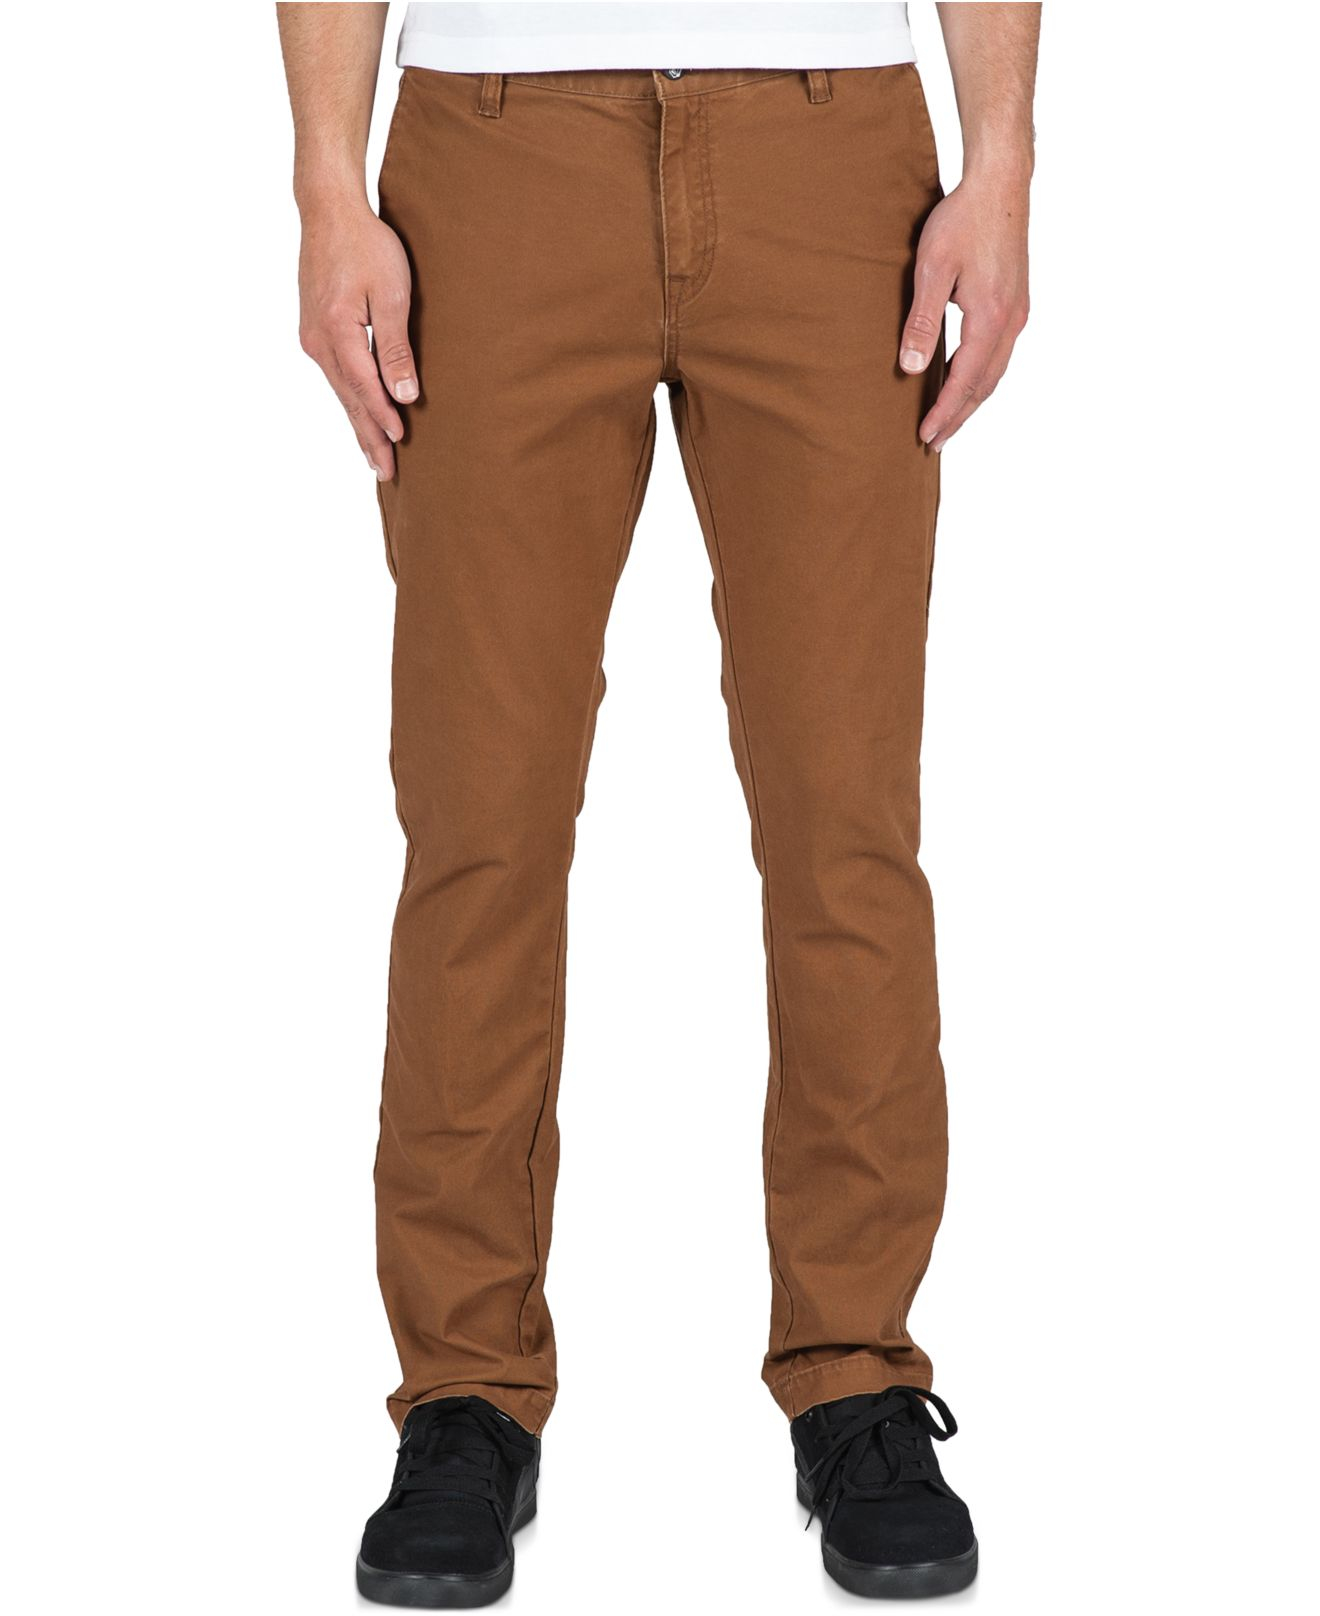 Lyst - Volcom Frickin Slim-fit Canvas Chino Pants in Brown for Men